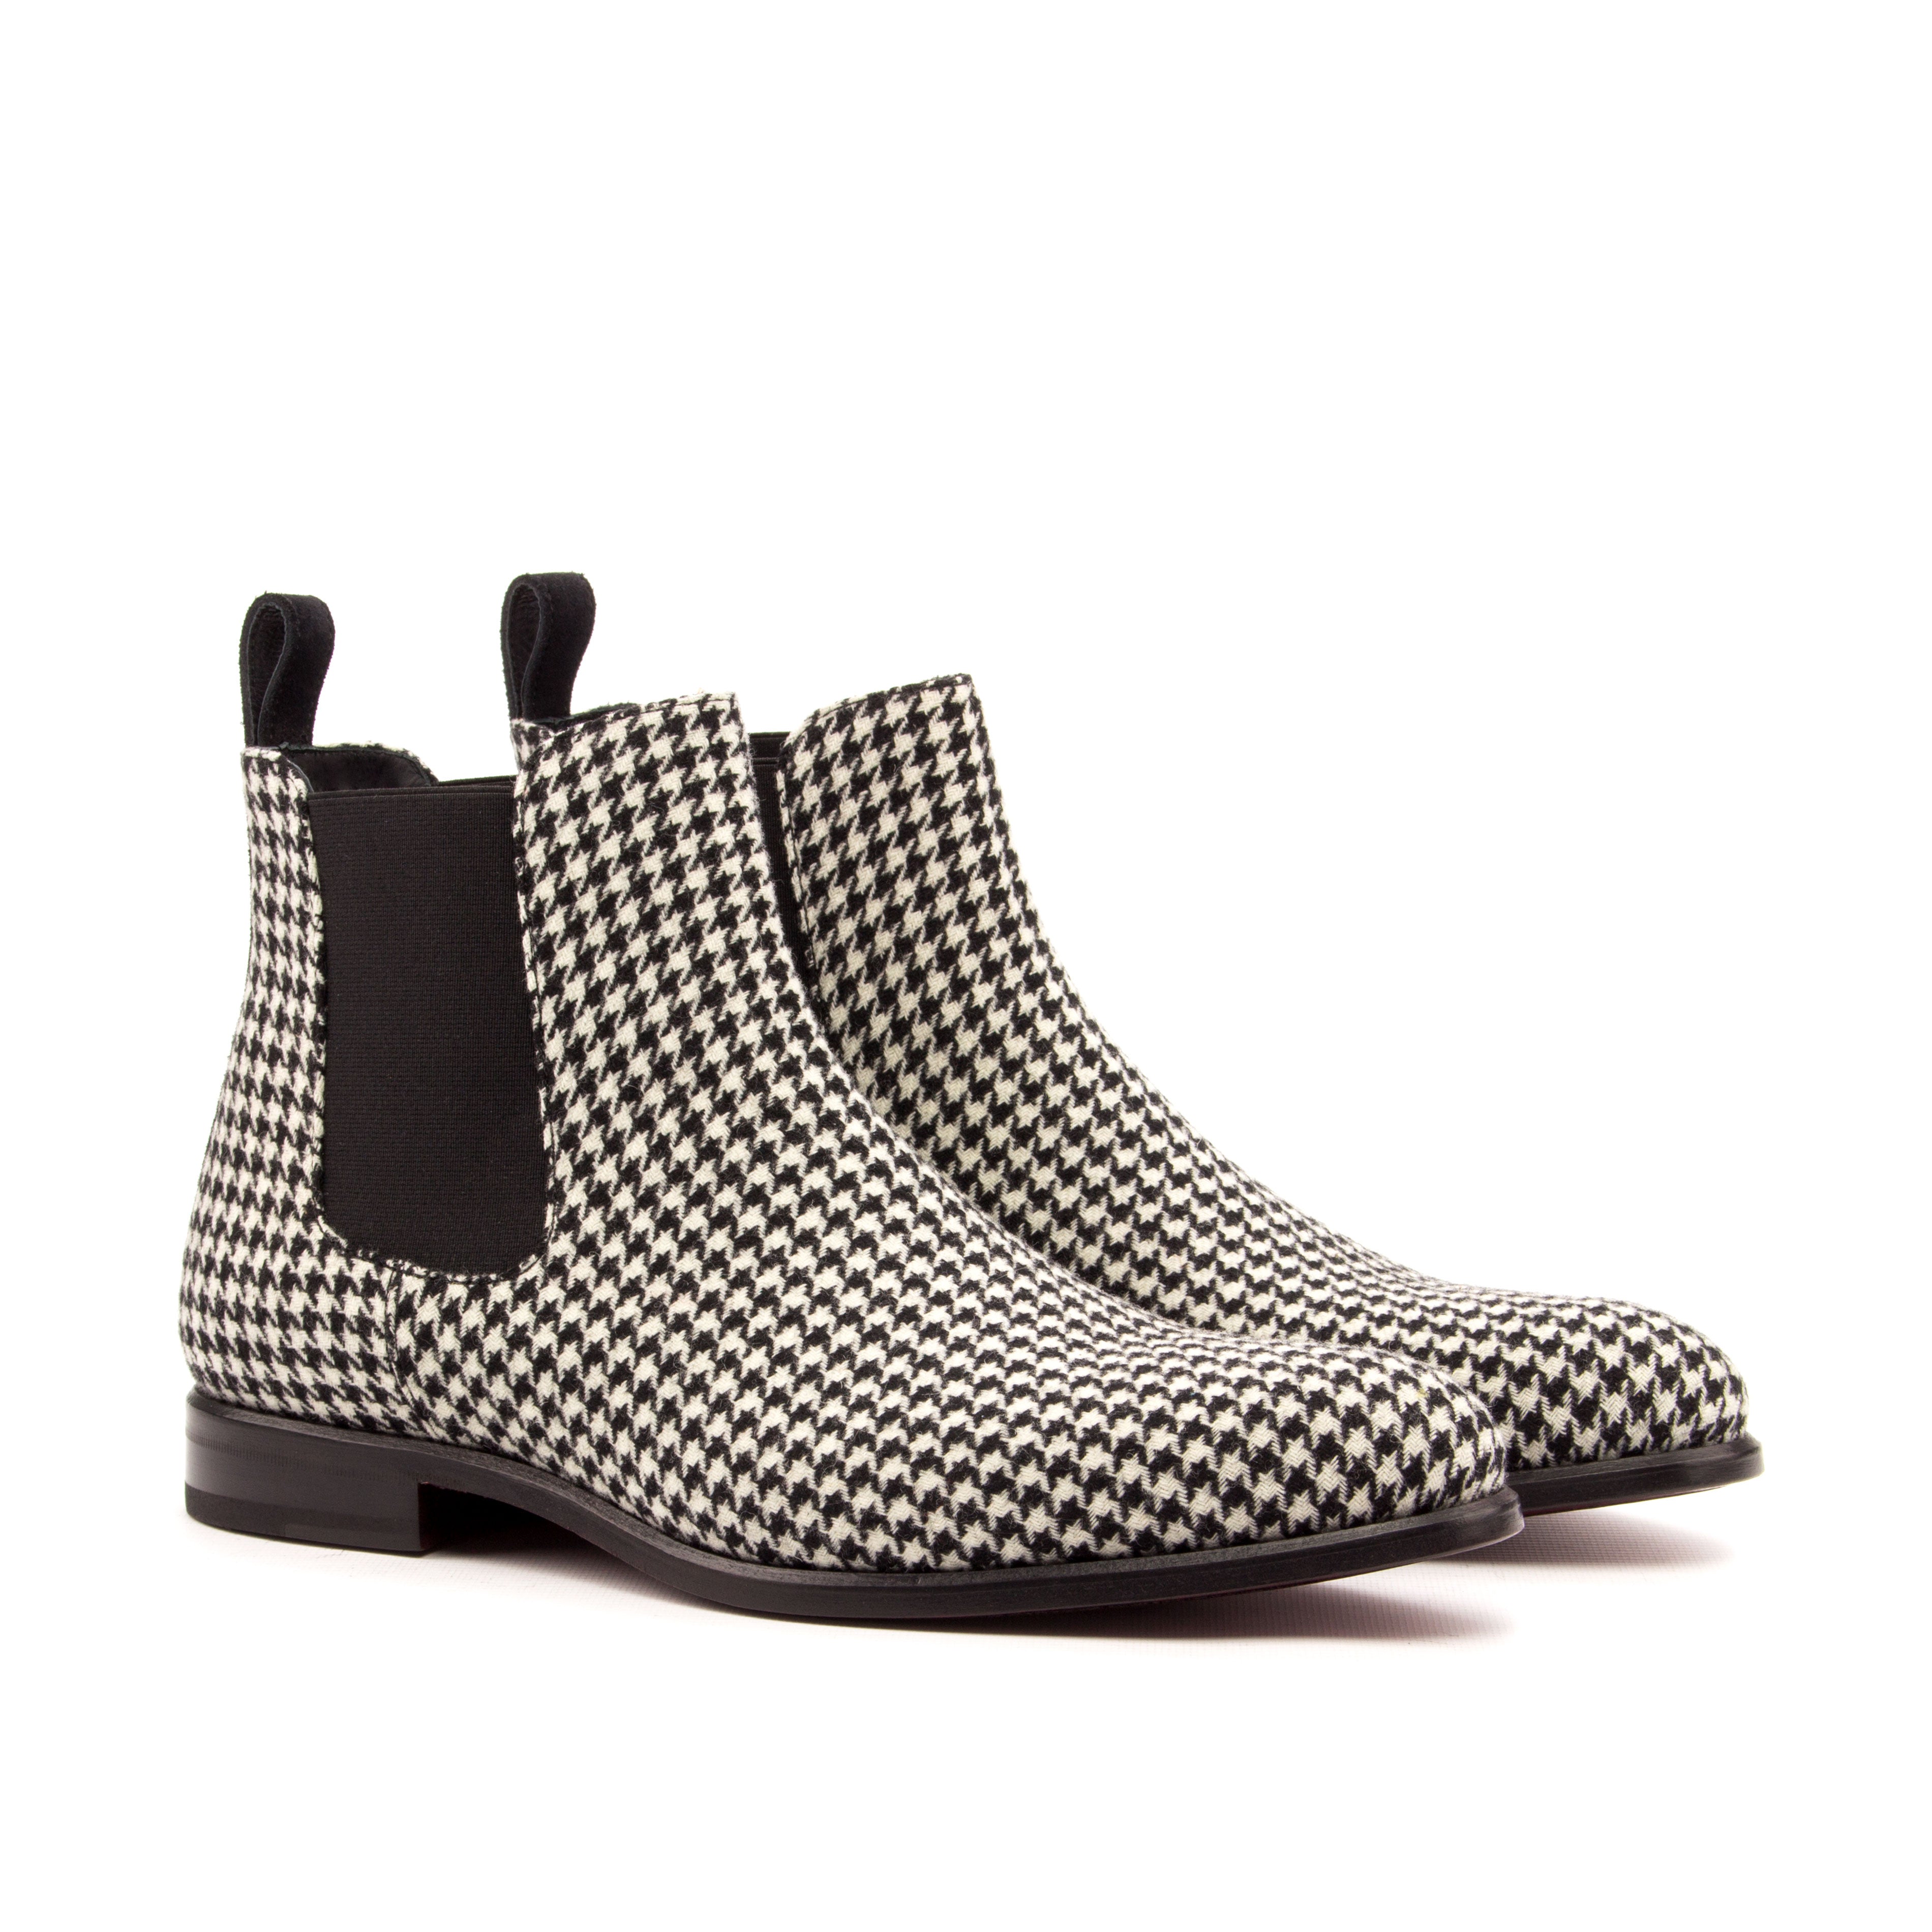 Black Suede & Houndstooth Chelsea Boot